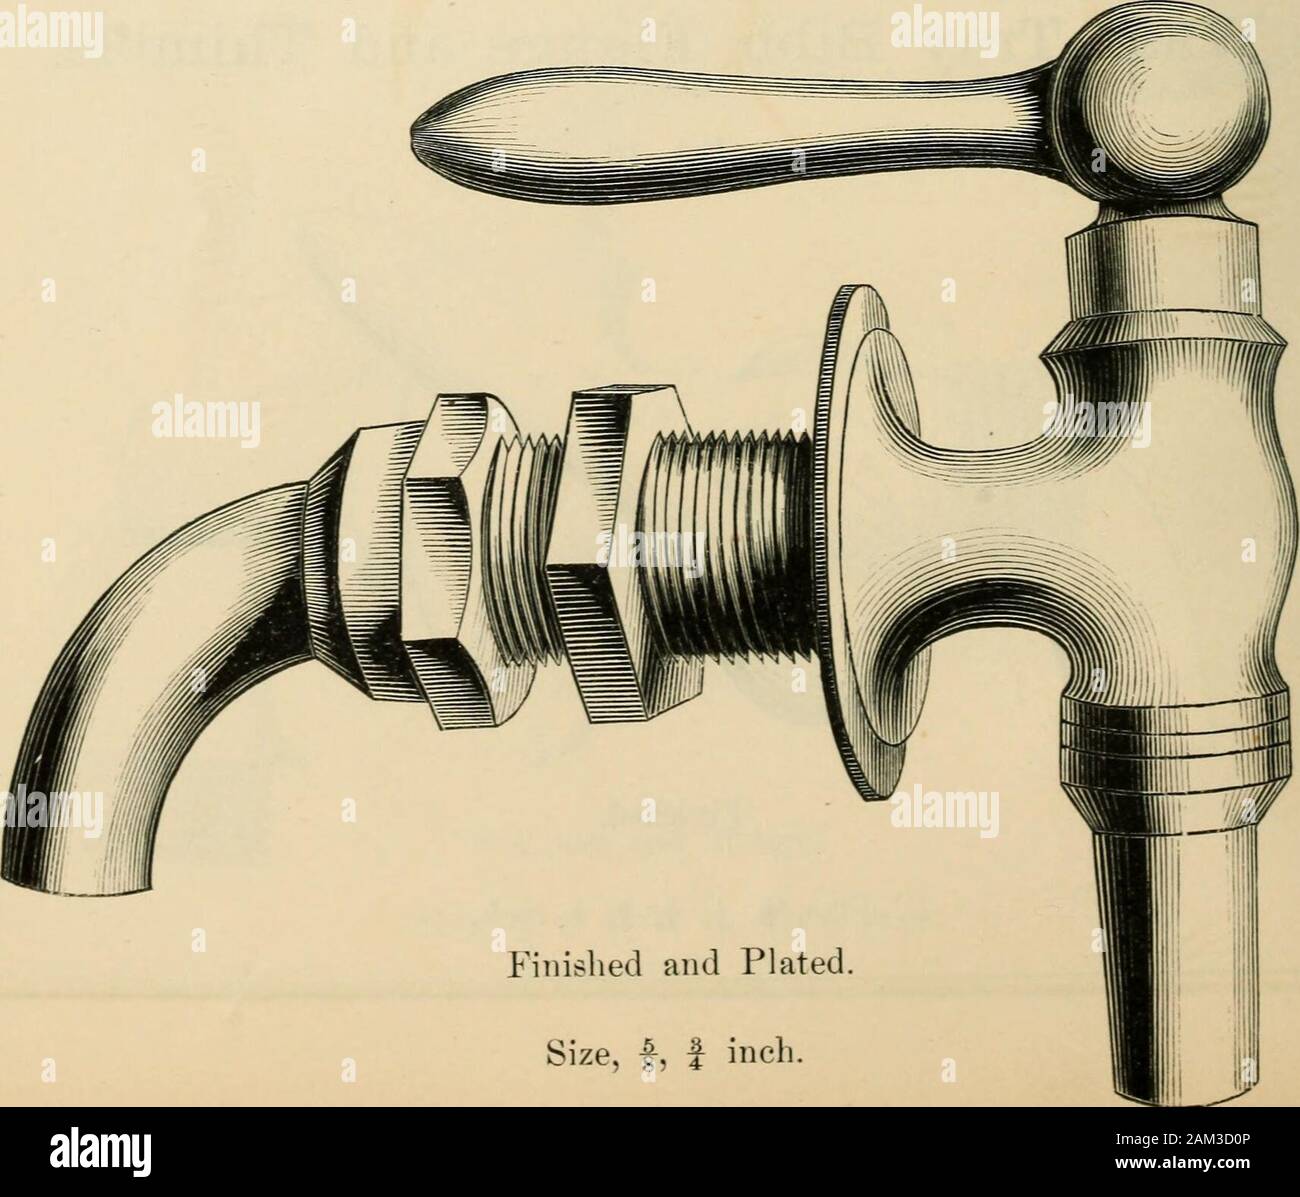 Illustrated catalogue of plumbers' brass work, copper, iron, and earthen ware, and plumbing materials . Finished and Plated Size, ^, f, f inch. Bath Bibb—Flange—Nut and Bent Coupling, Fig. 12.. TJl I—1 ;&gt; &lt; p ^ d Size, f, J inch. HAYDEN, GERE & CO.S ILLUSTRATED CATALOGUE. 13 Hose Bibb—Flange and Thimble. FiC4. 13. Stock Photo